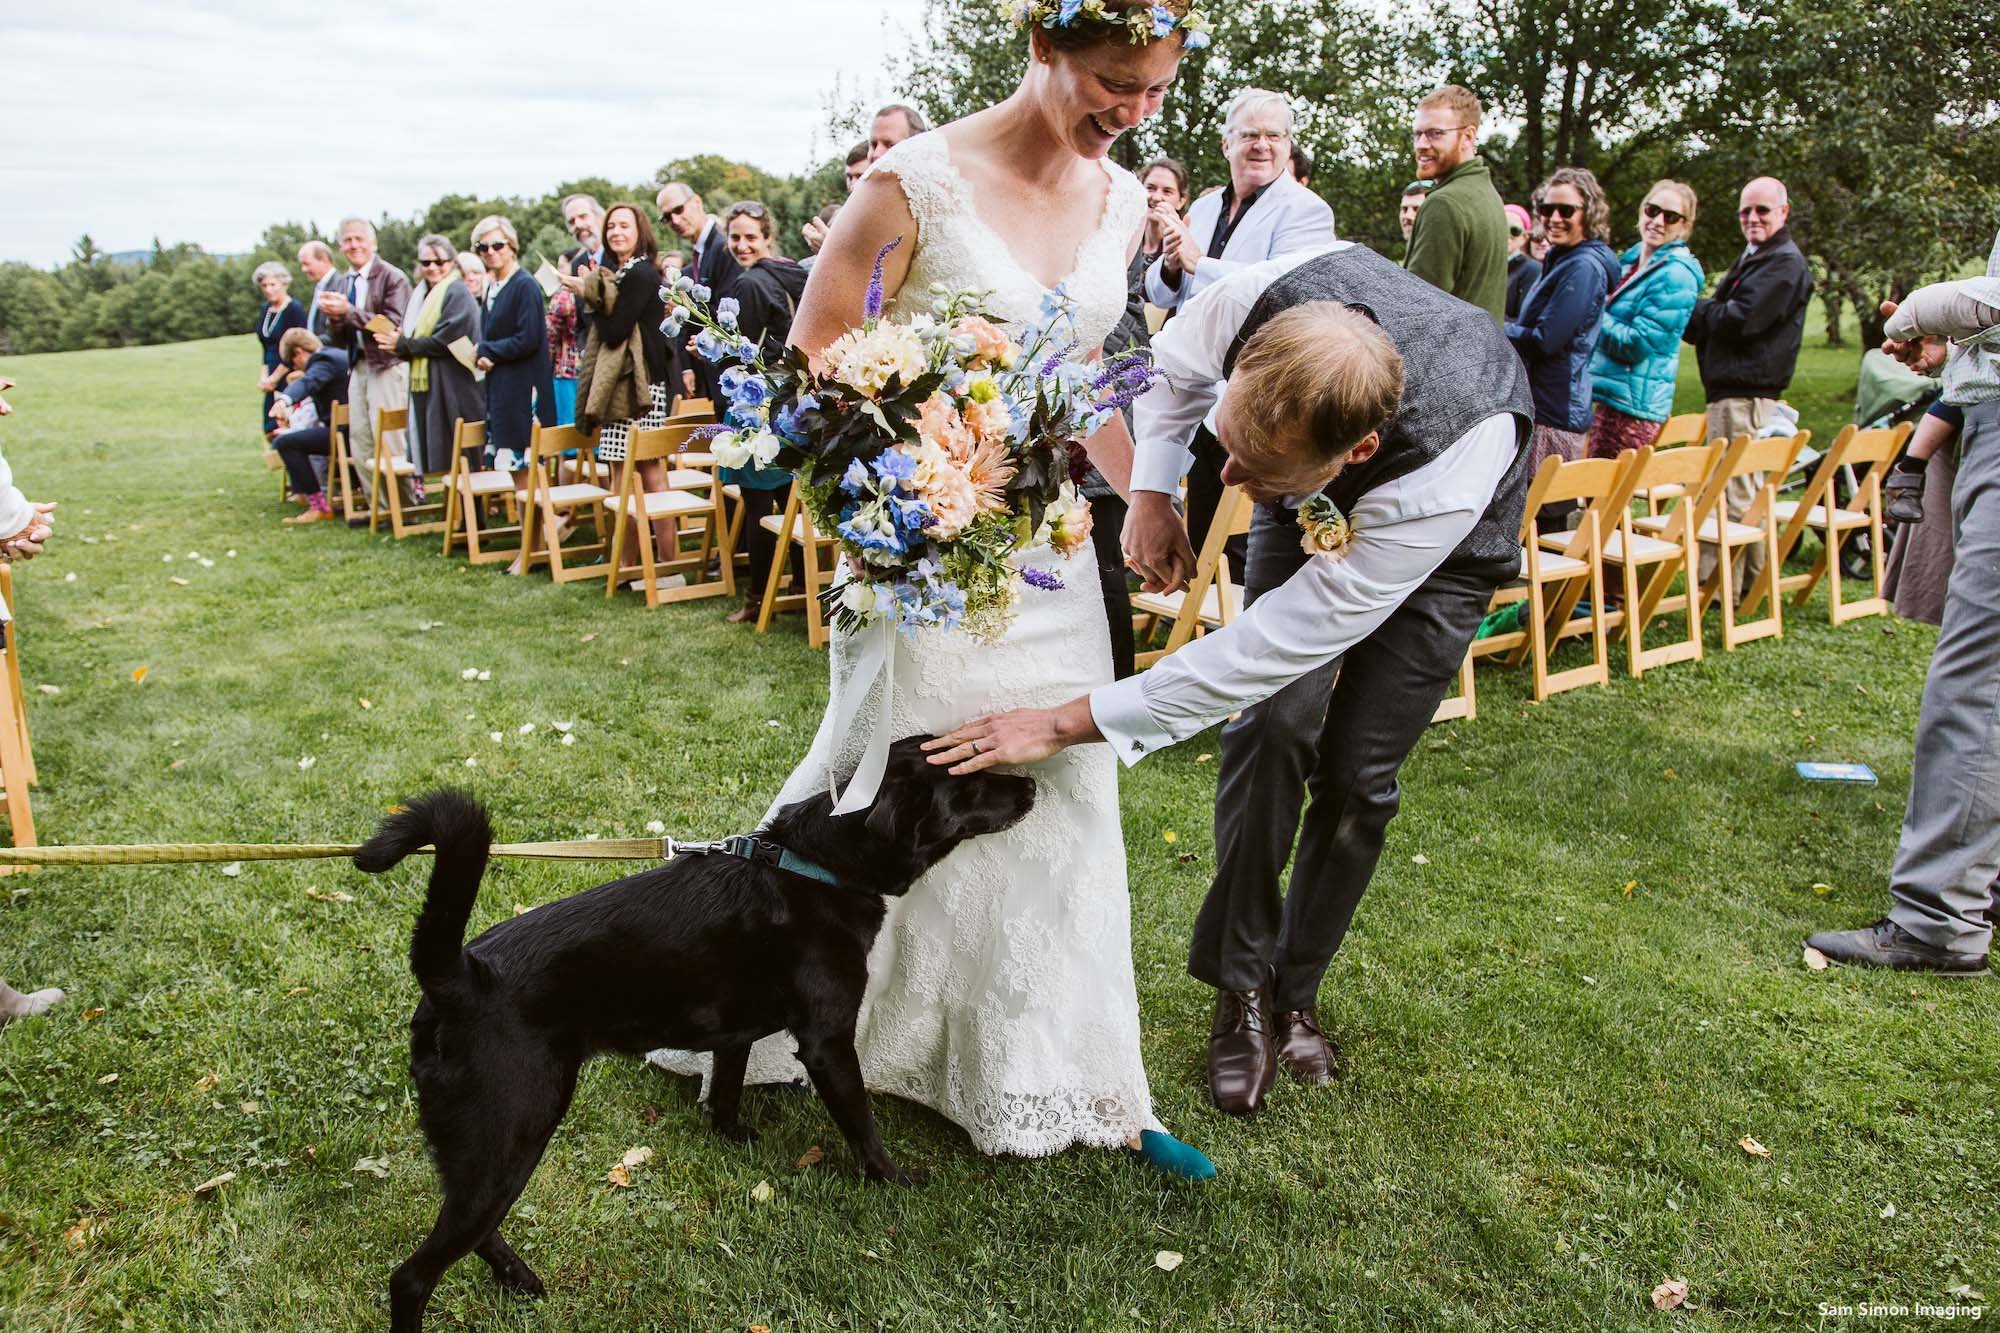 A dog joins the bride and groom at an outdoor wedding